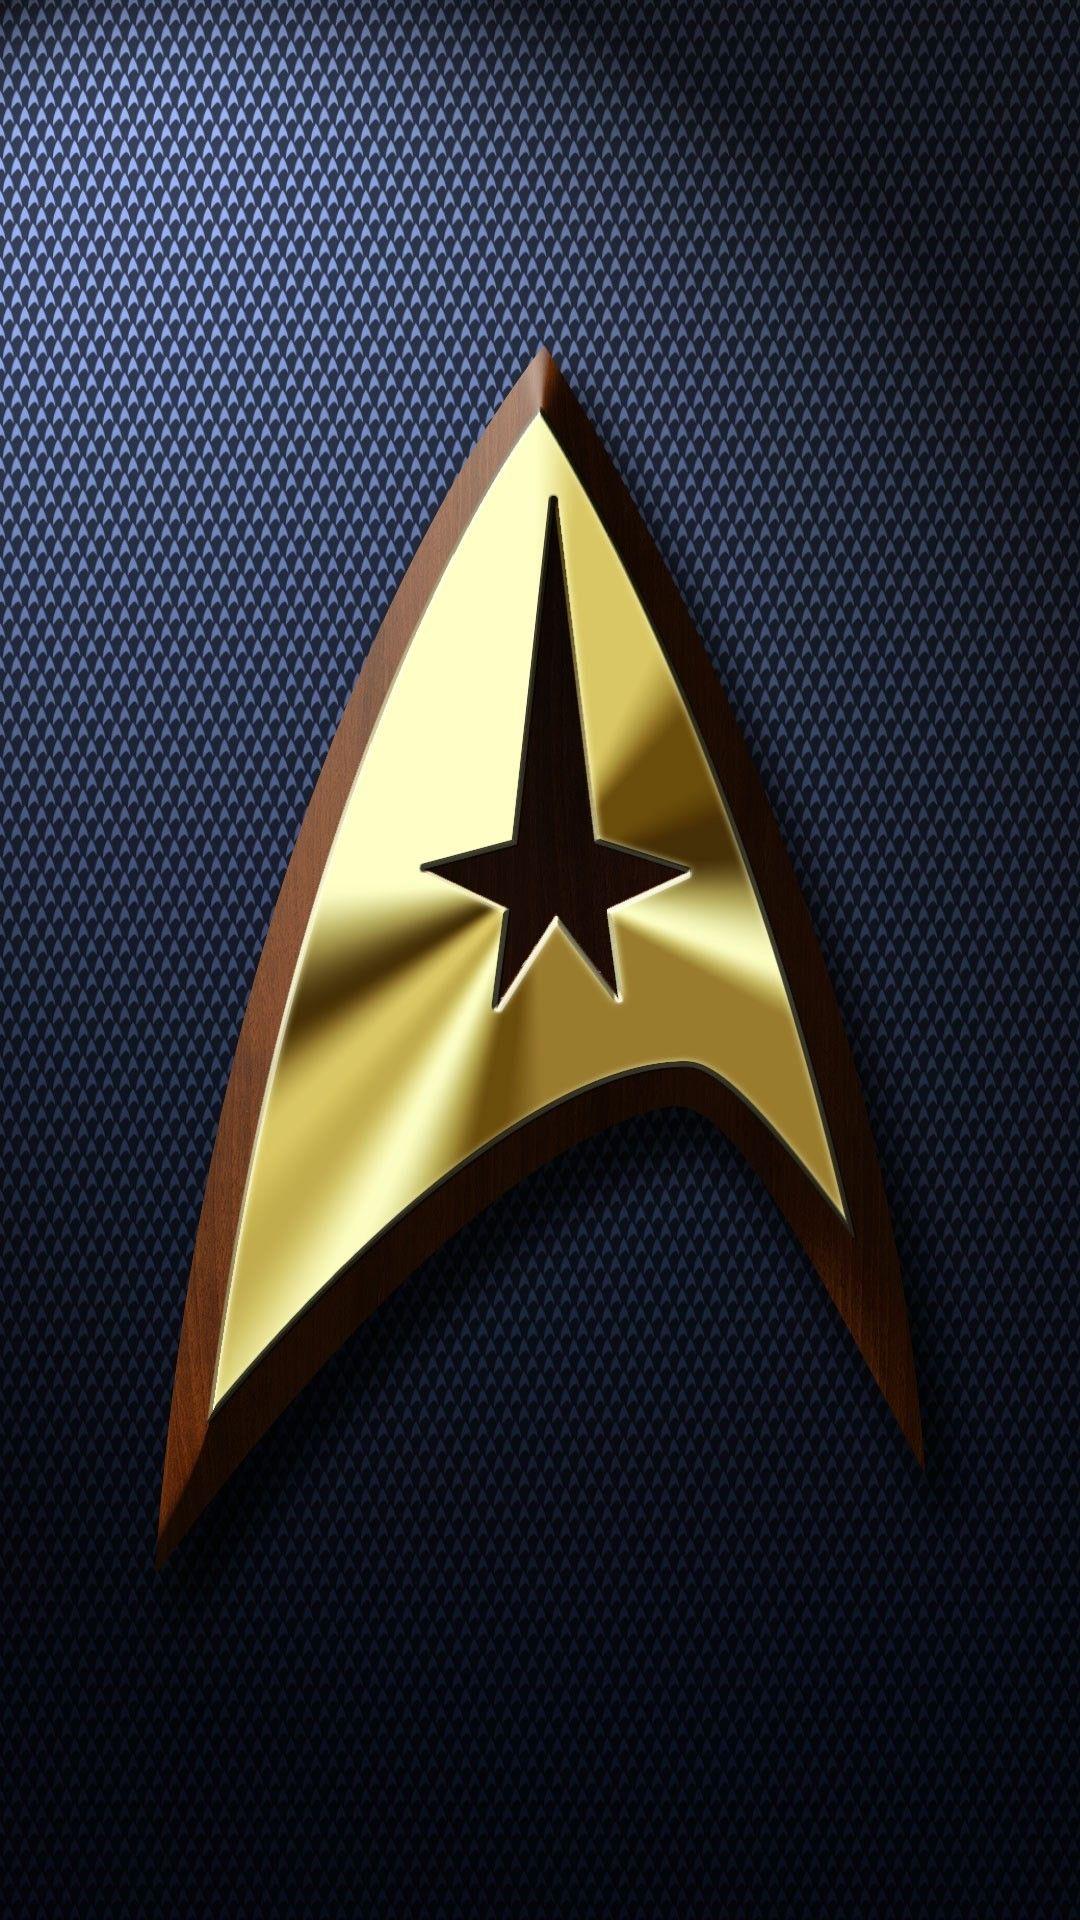 Star Trek Android Wallpapers Top Free Star Trek Android Backgrounds Wallpaperaccess